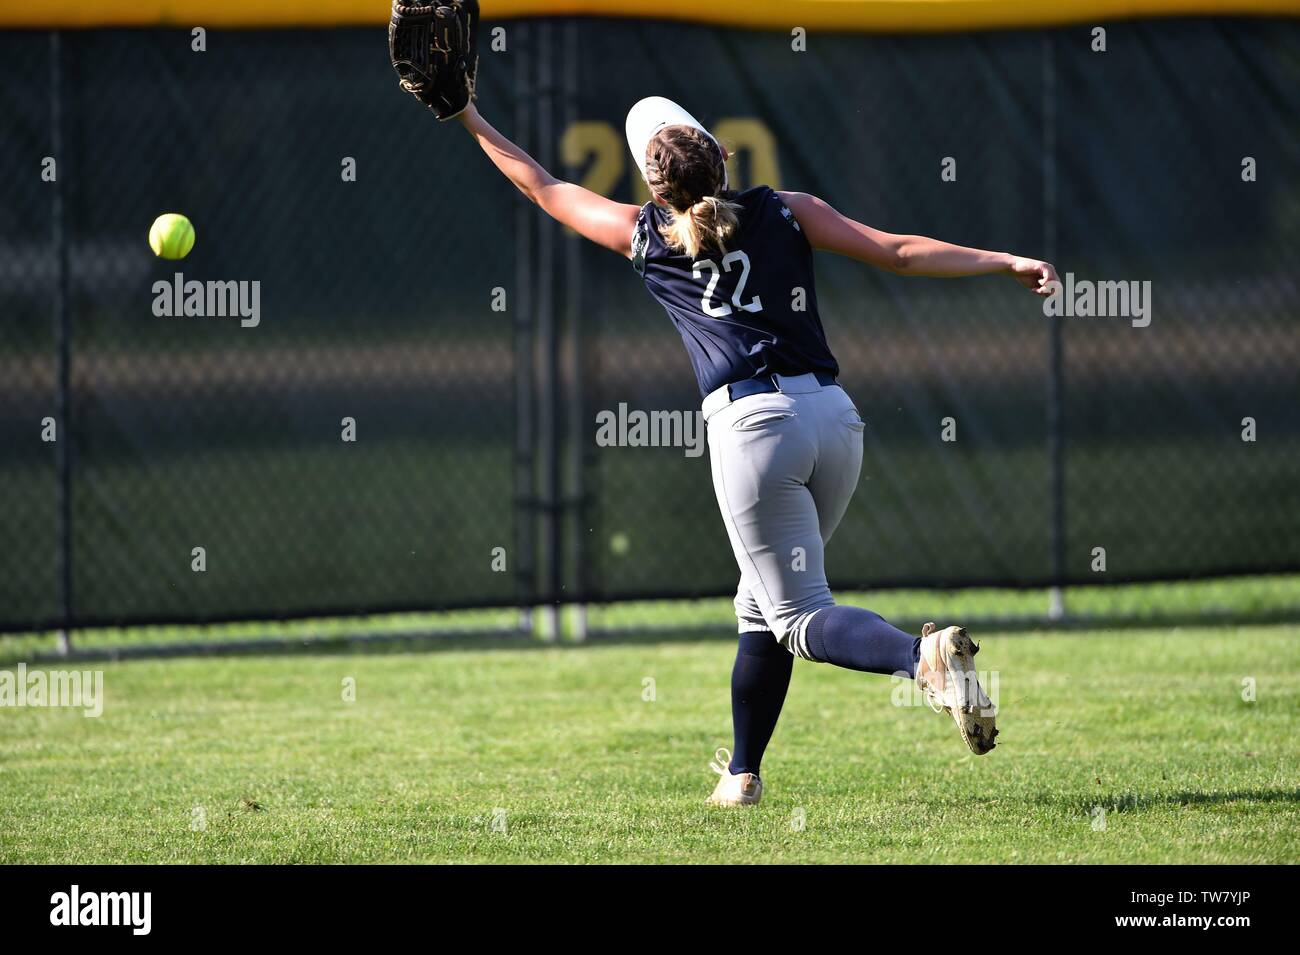 Center fielder unable to catch up with a drive over her head that resulted in a double. USA. Stock Photo